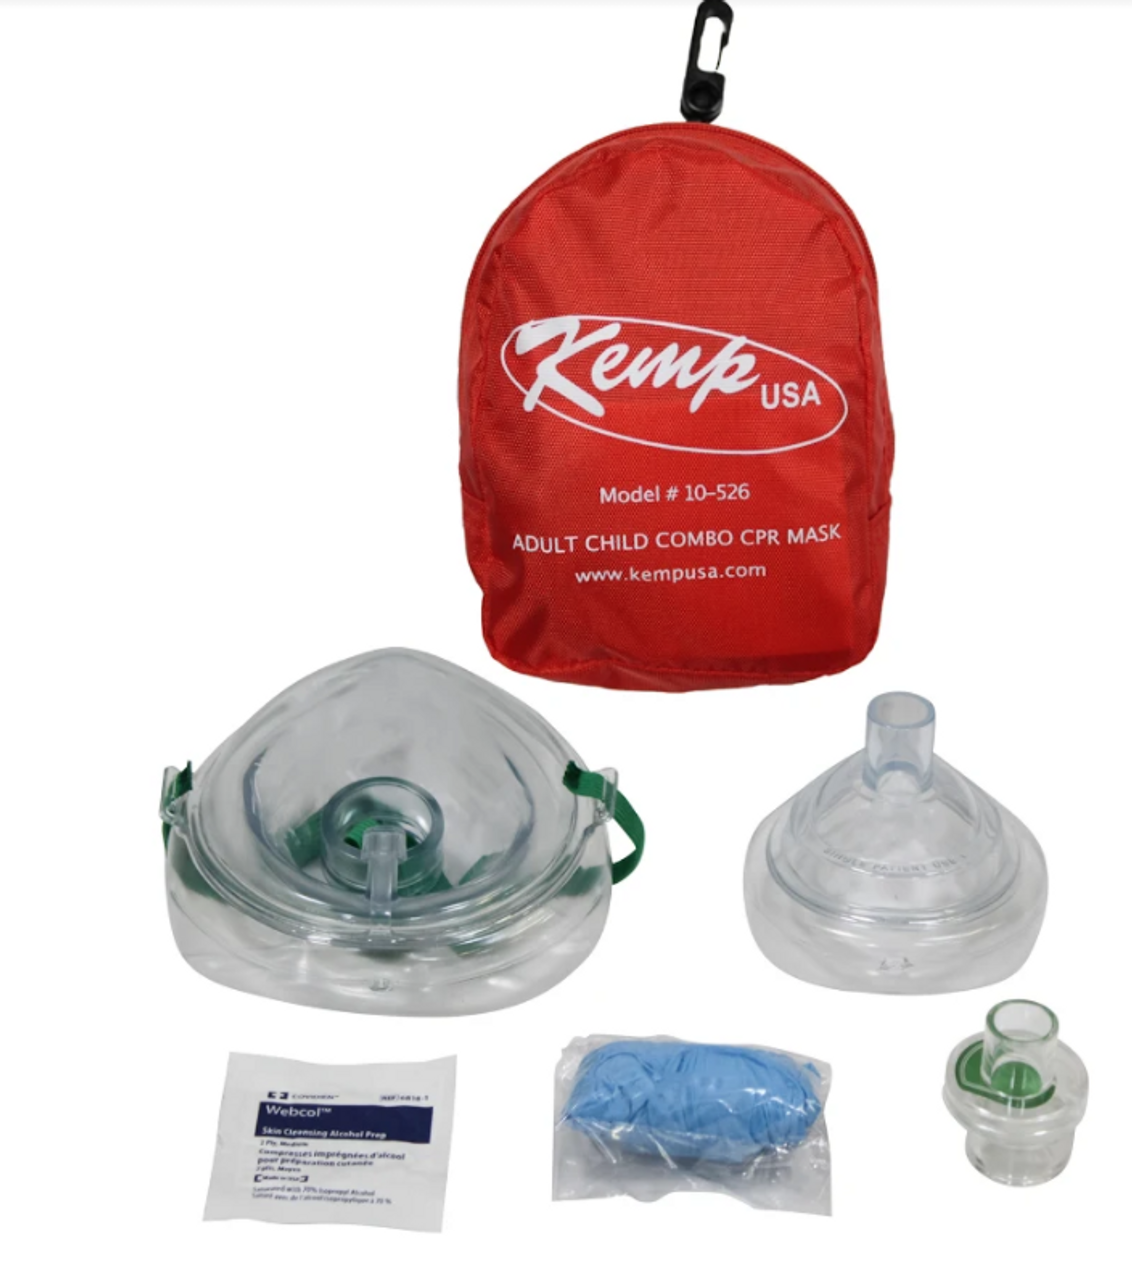 KEMP USA Adult and Child Combo CPR Pocket Mask - 10-526